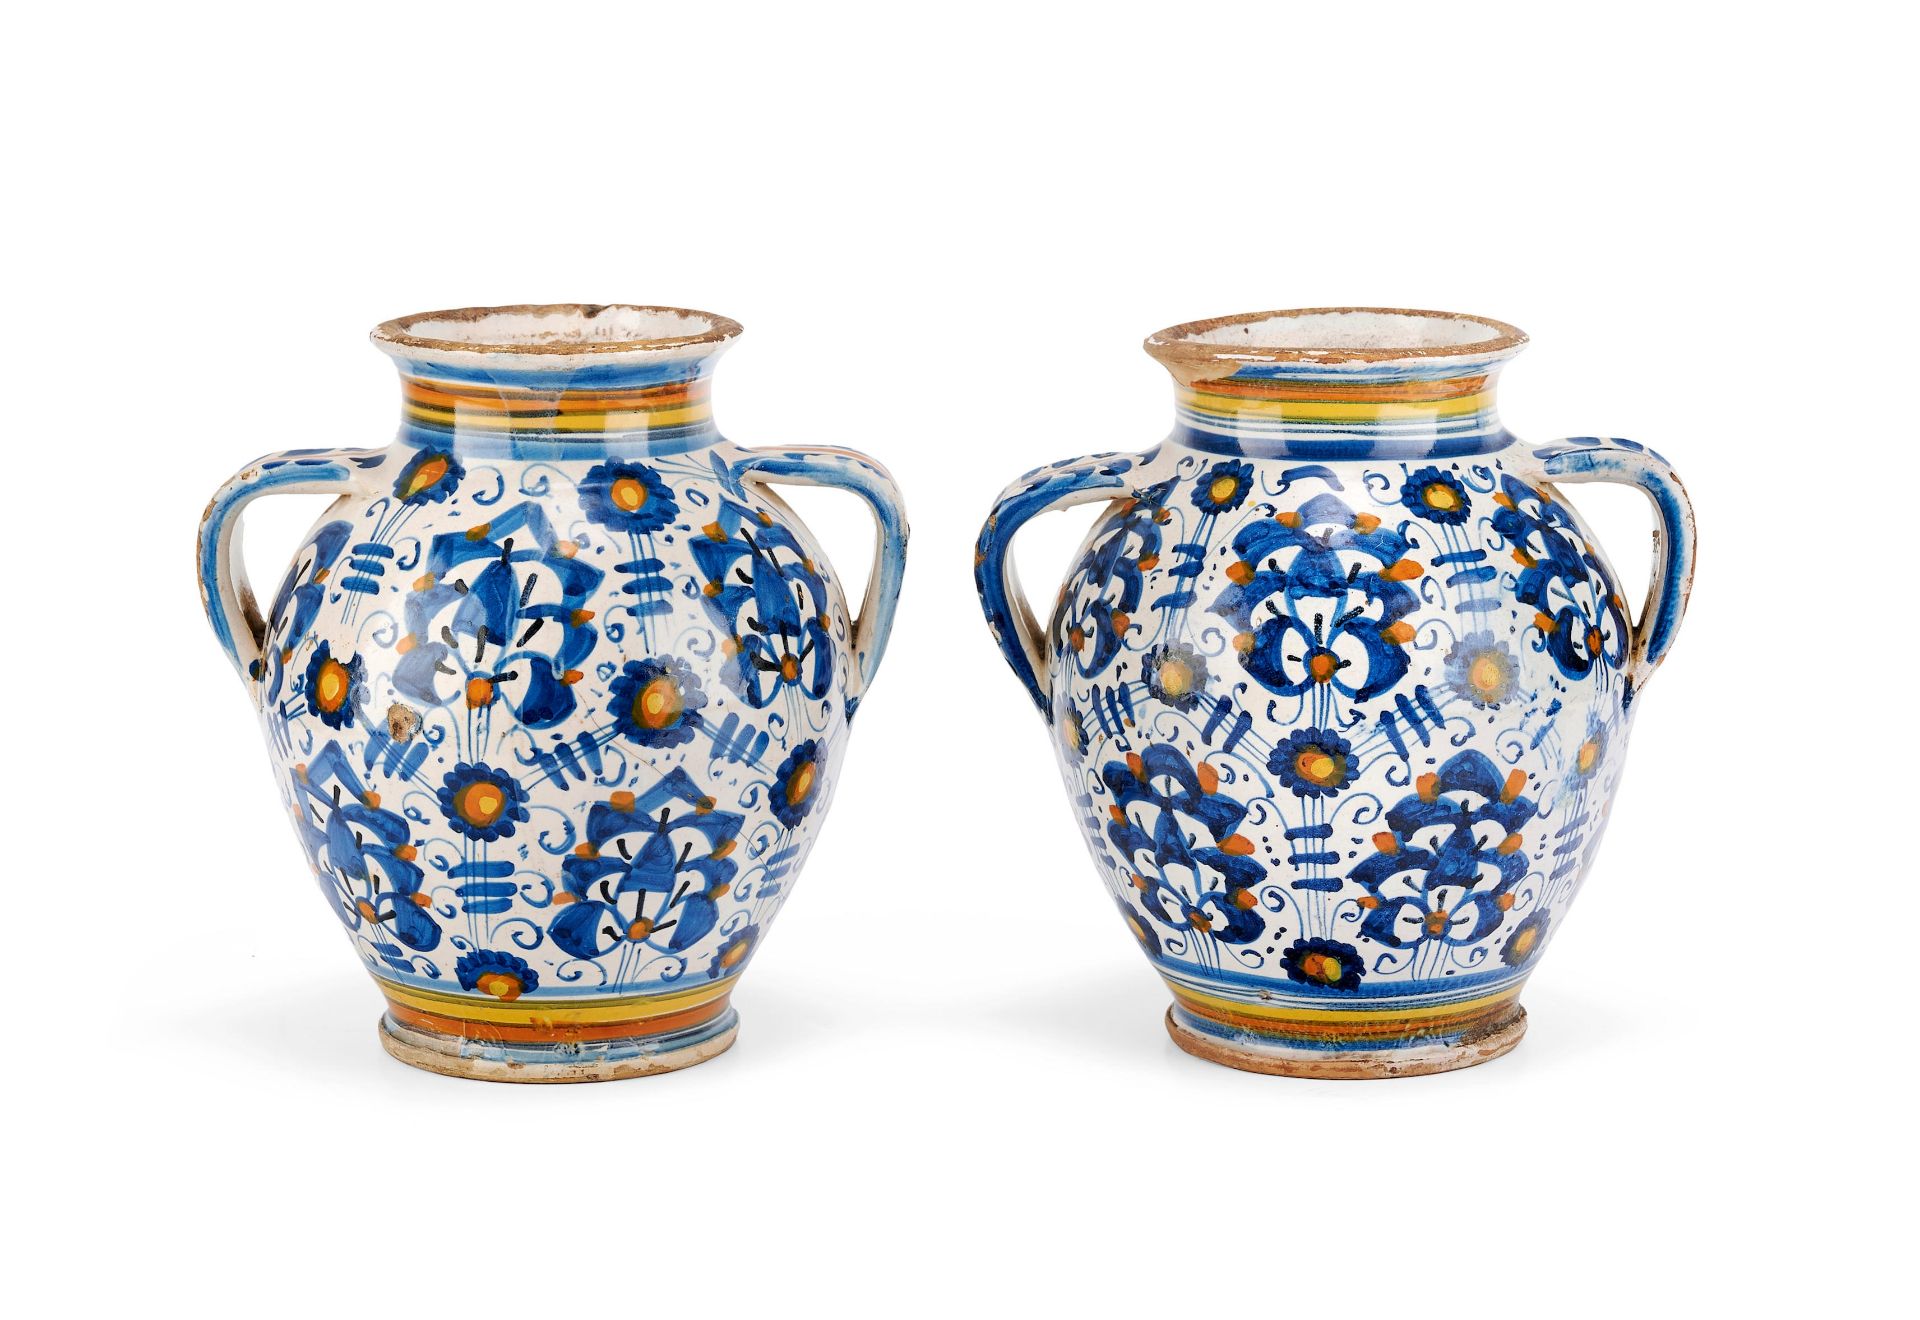 A pair of Montelupo maiolica two-handled jars, end of 16th century